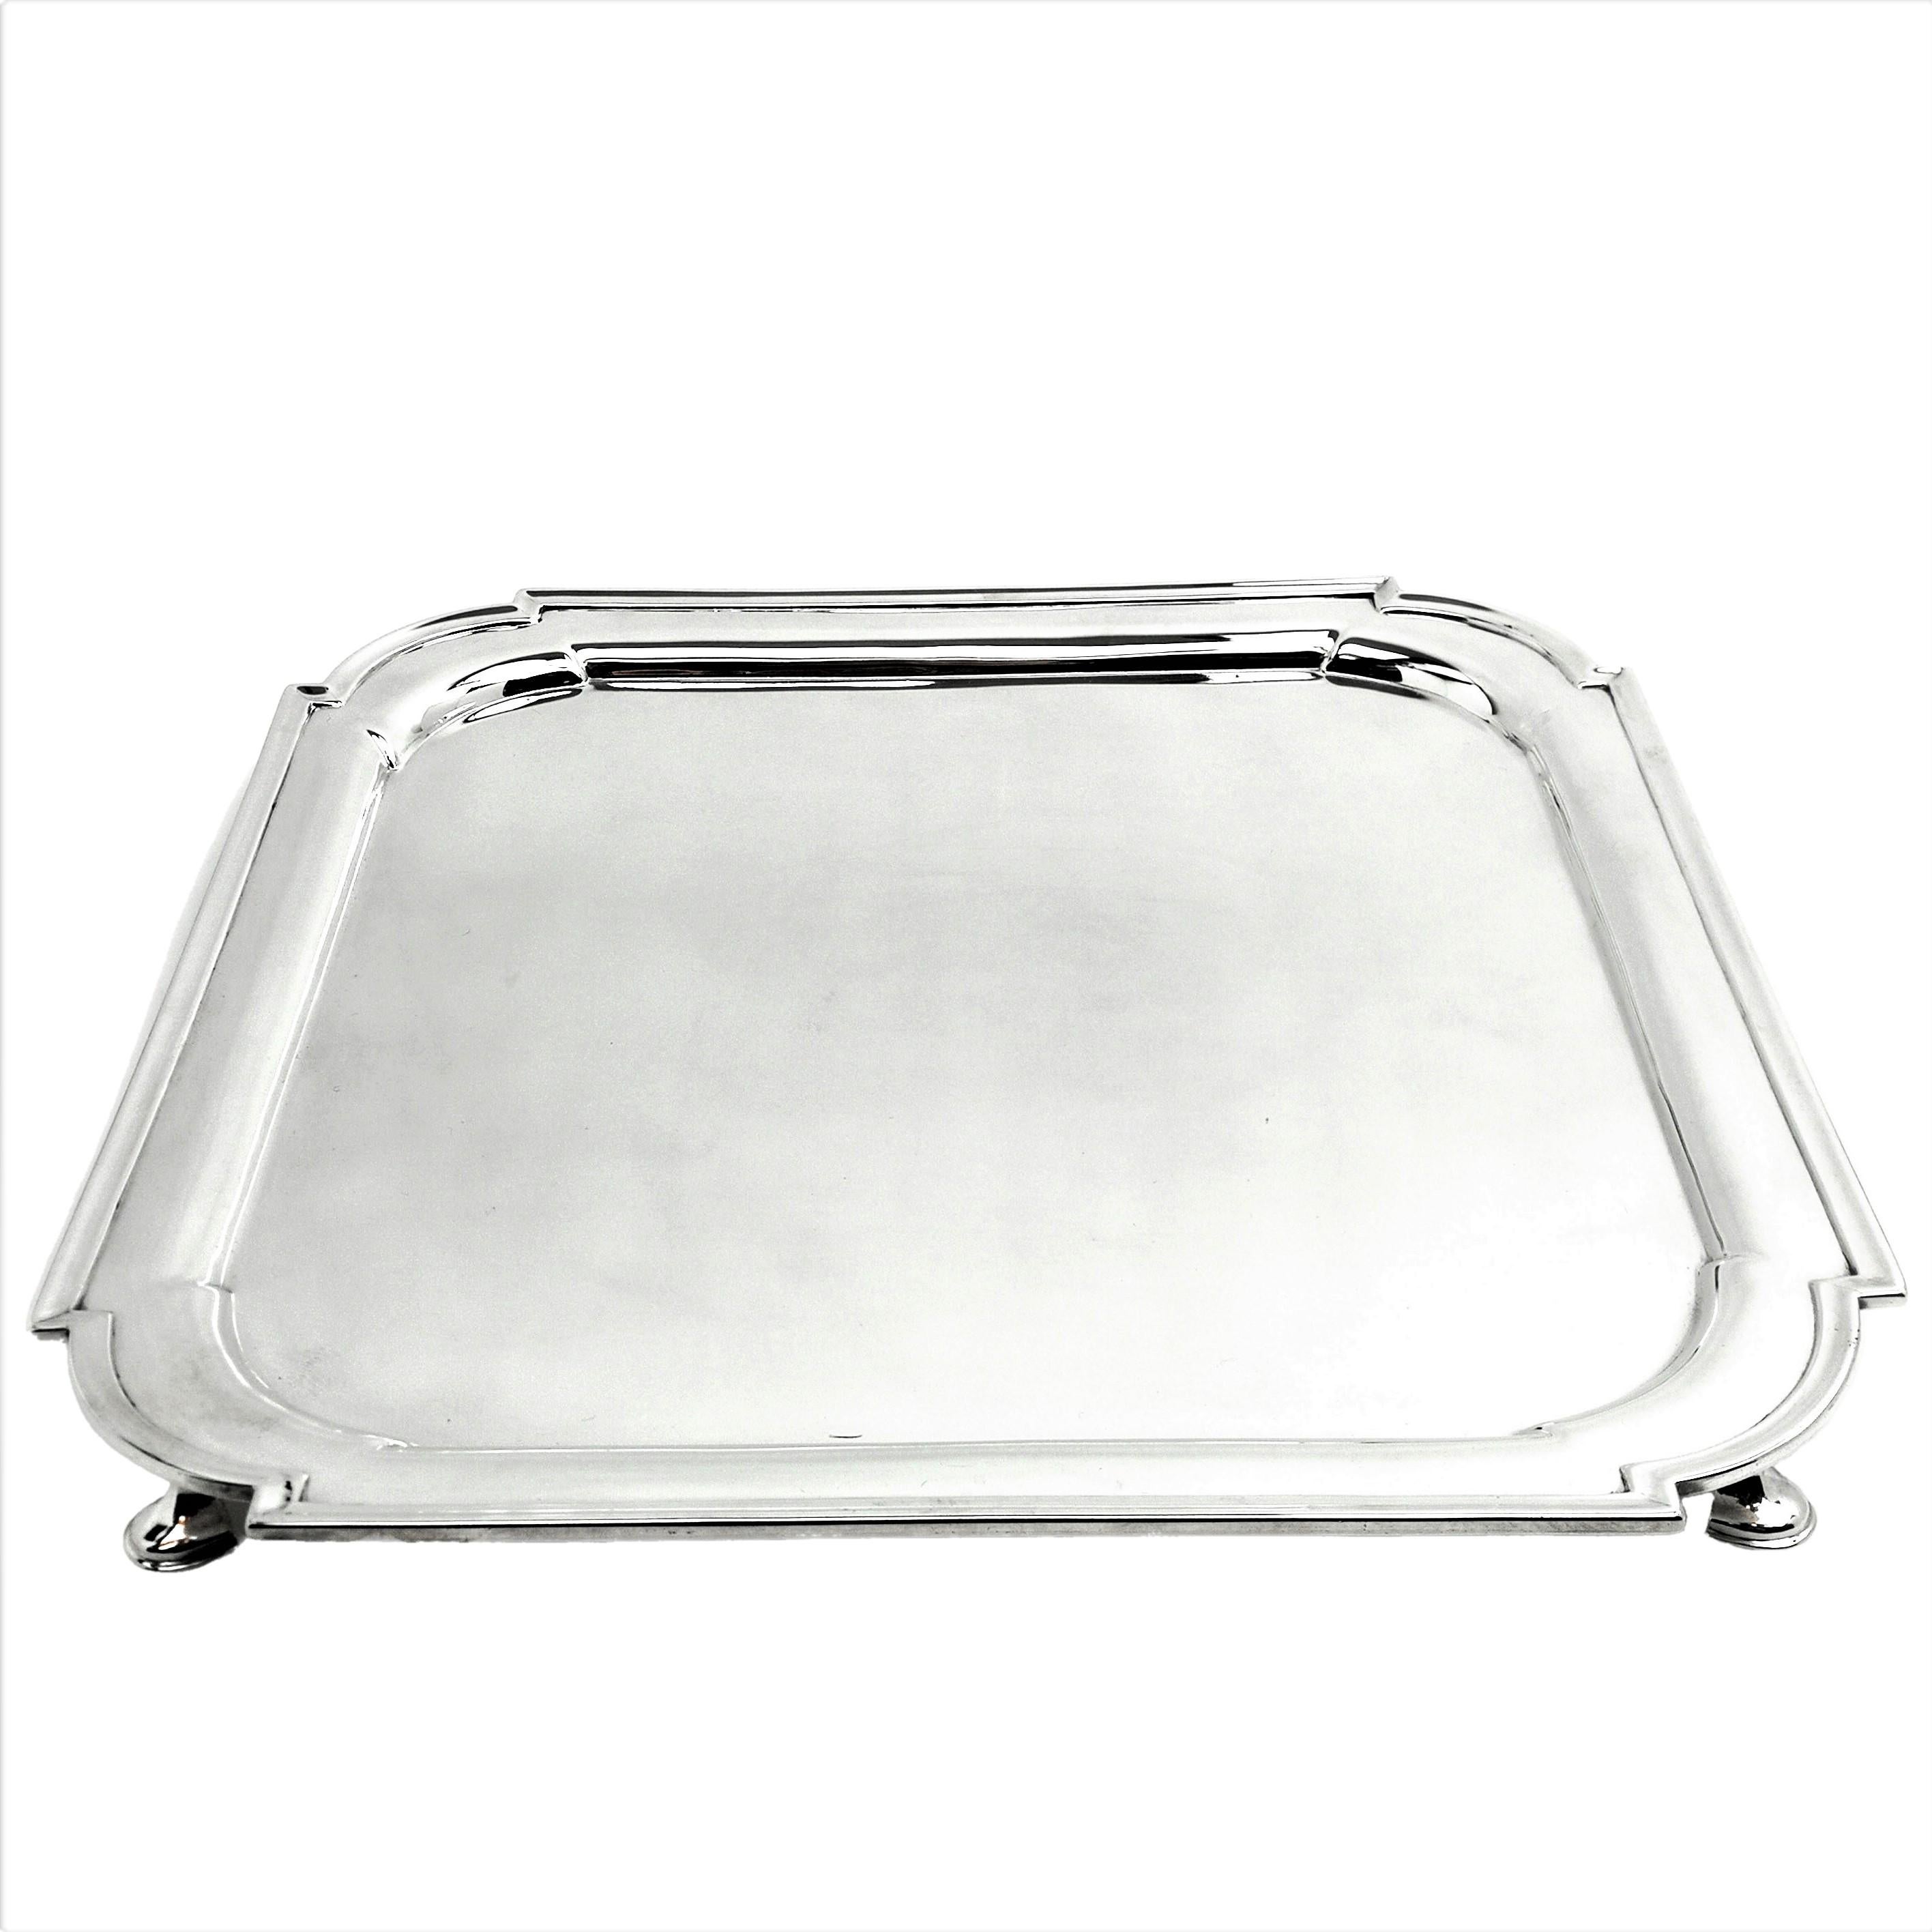 An elegant antique solid Silver Salver in a square shape with shaped corners and standing on four hoof feet. This Tray is highly polished and is suitable for engraving.
 
 Made in London in 1903 by Lamberts.
 
 Approx. Weight - 974g / 31.3oz
Approx.